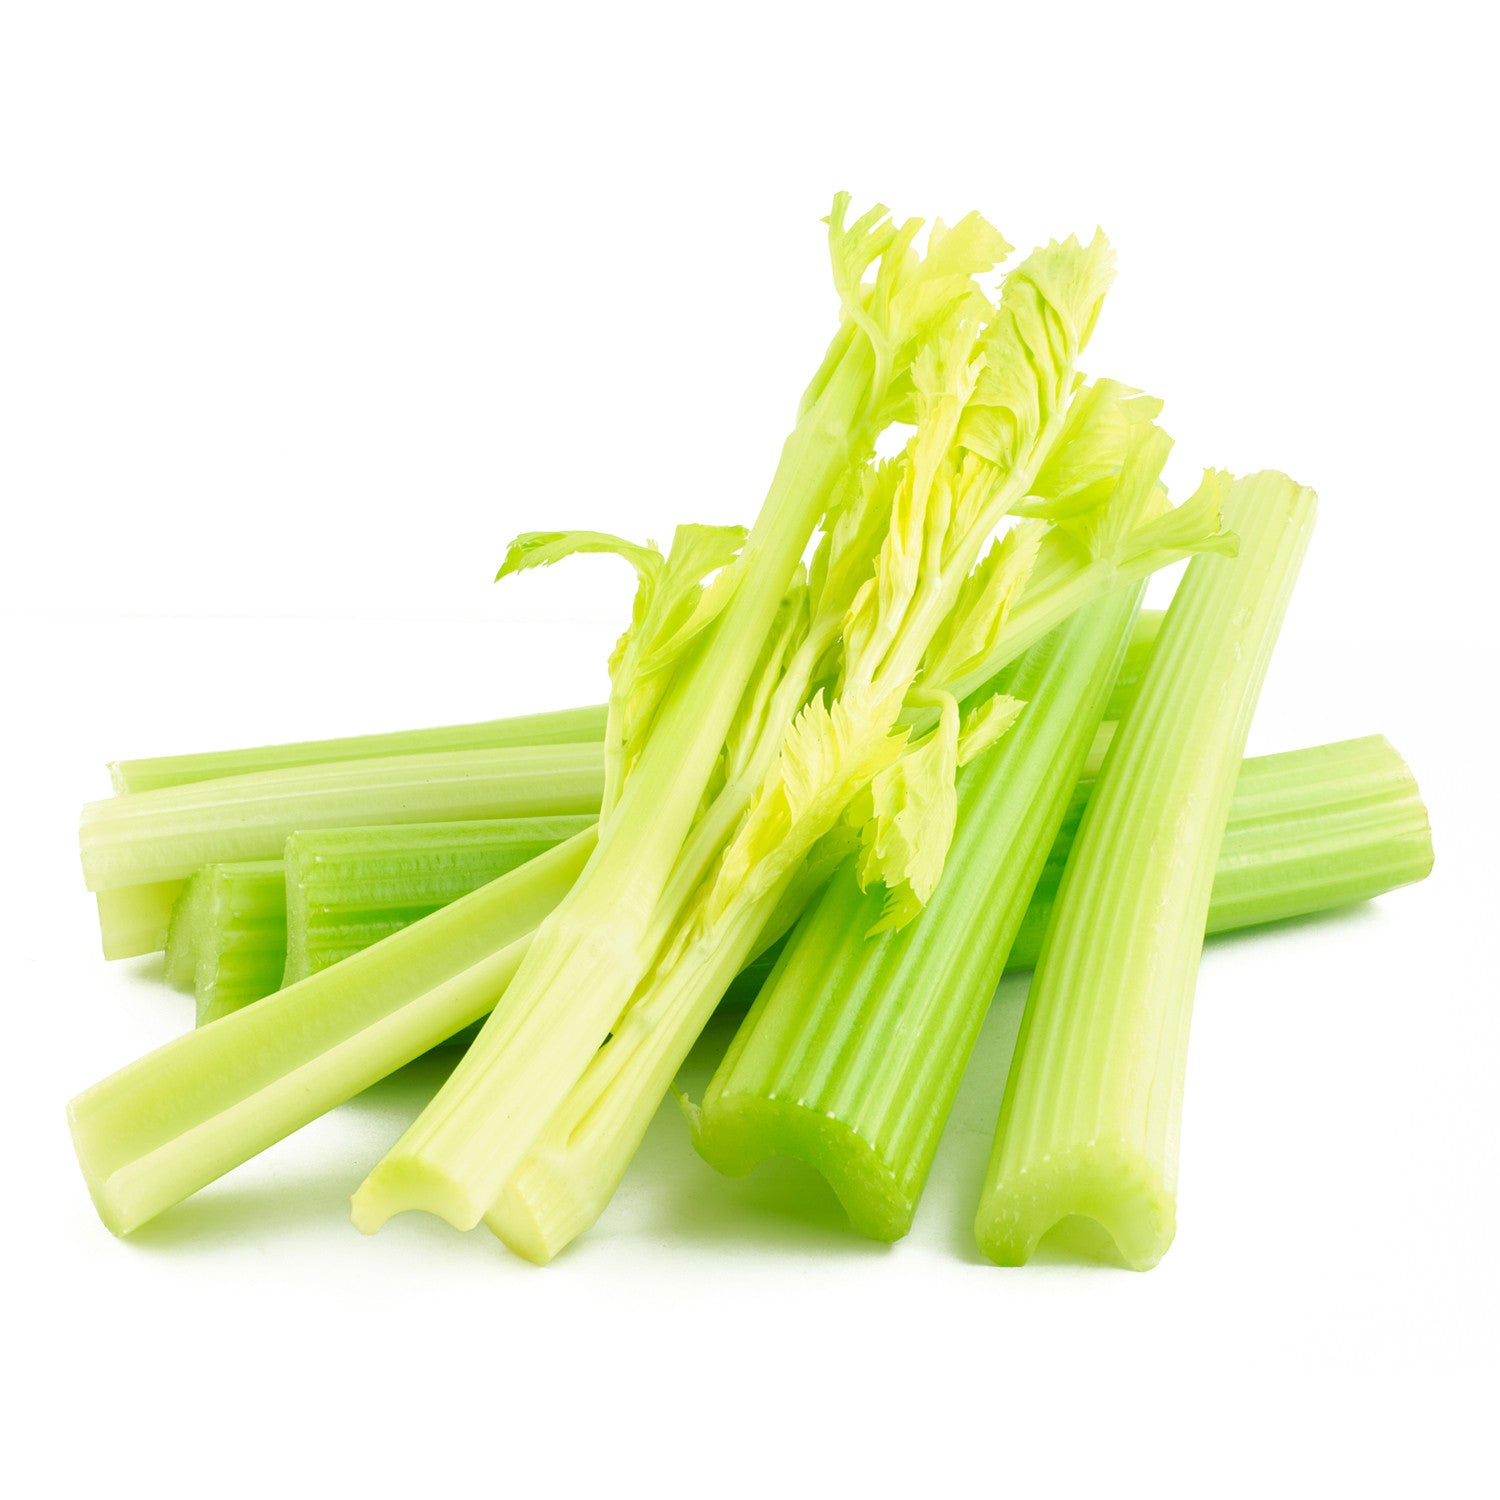 GET TO KNOW MORE ABOUT “CELERY”